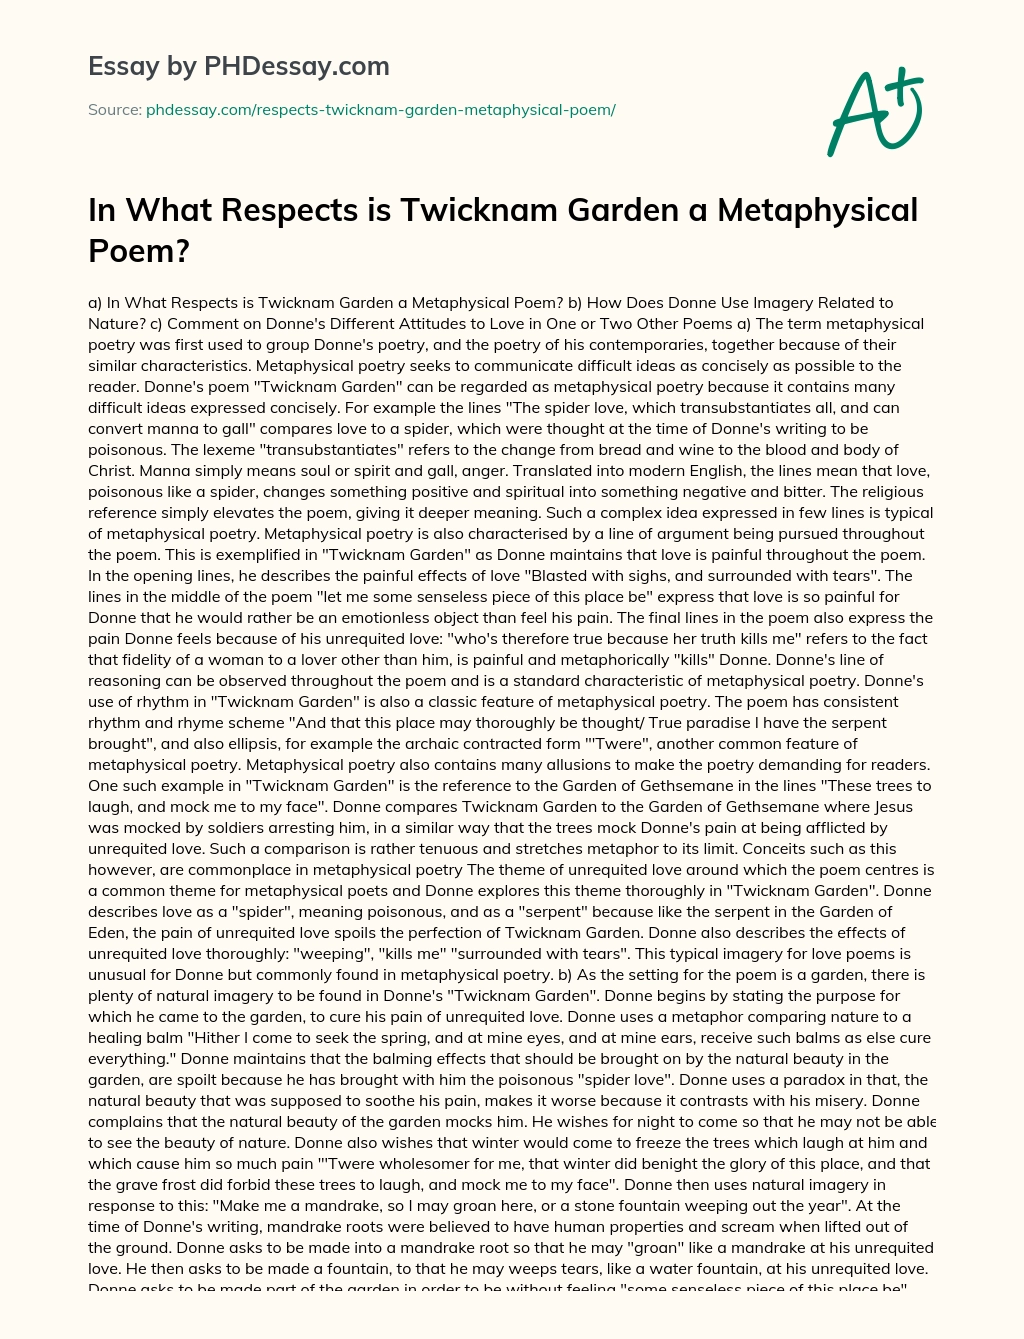 In What Respects is Twicknam Garden a Metaphysical Poem? essay